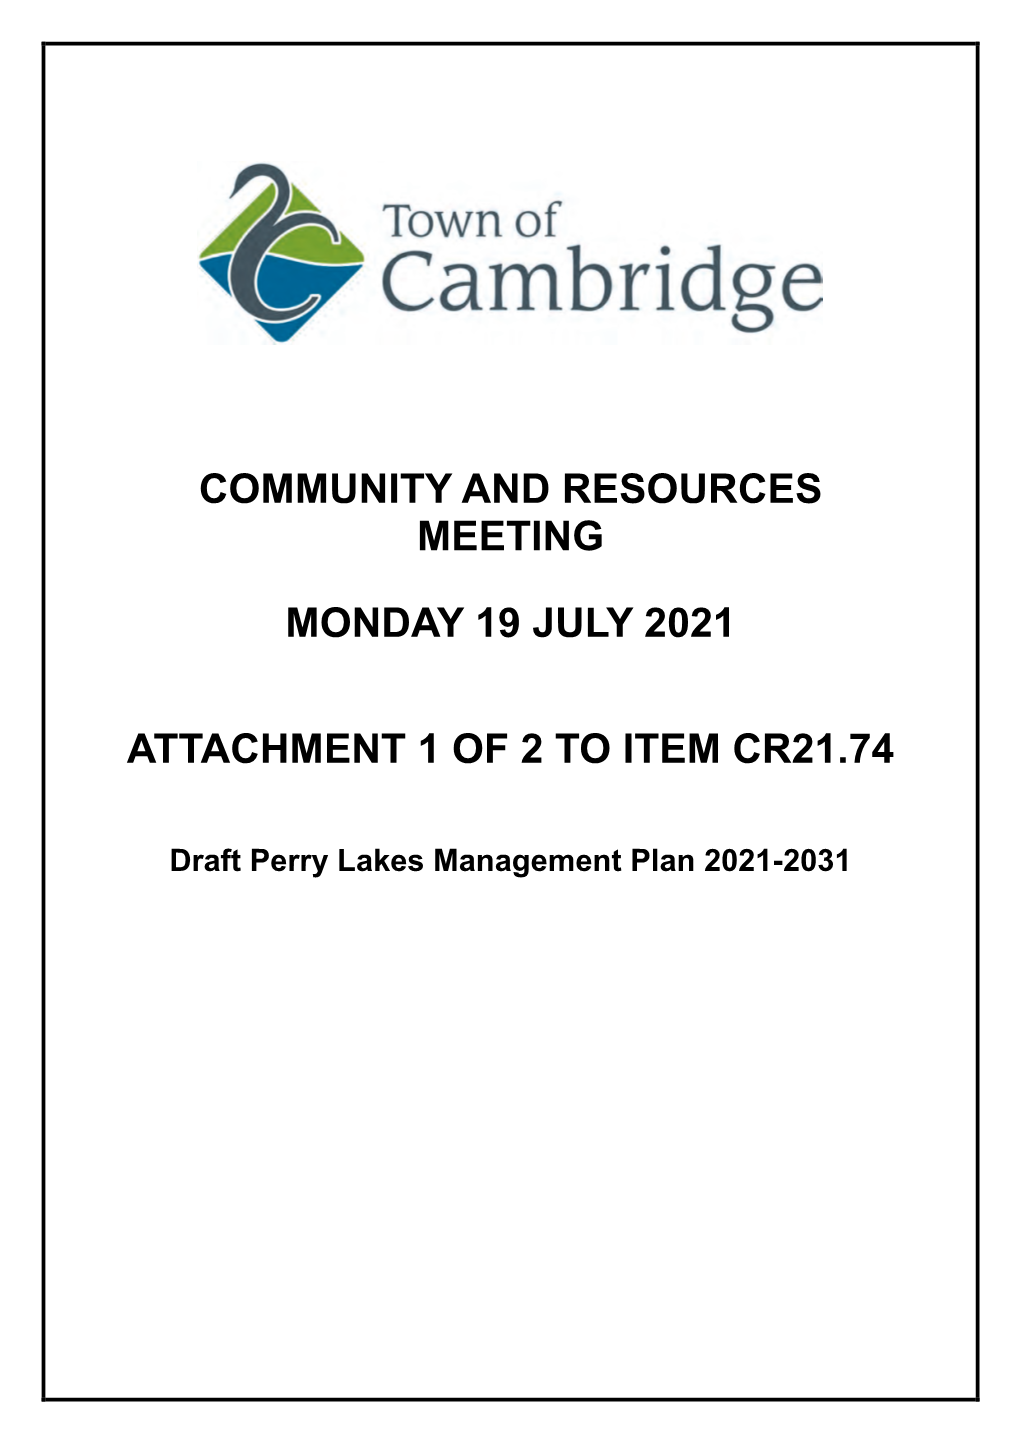 Community and Resources Meeting Monday 19 July 2021